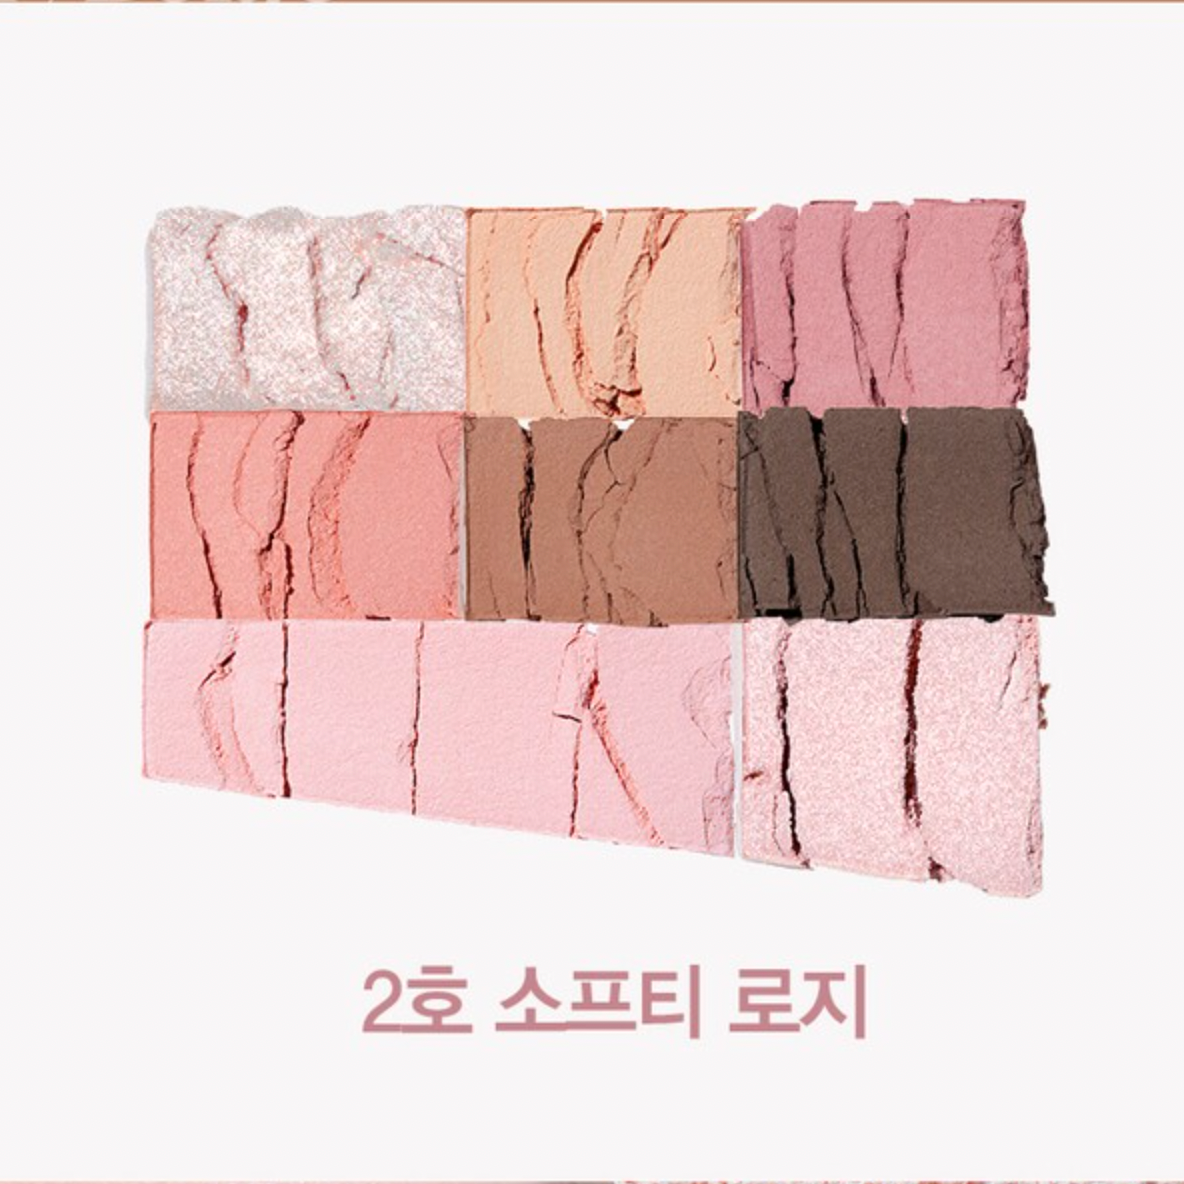 ESPOIR Real Eye Palette All New (Rosy BB Edition)